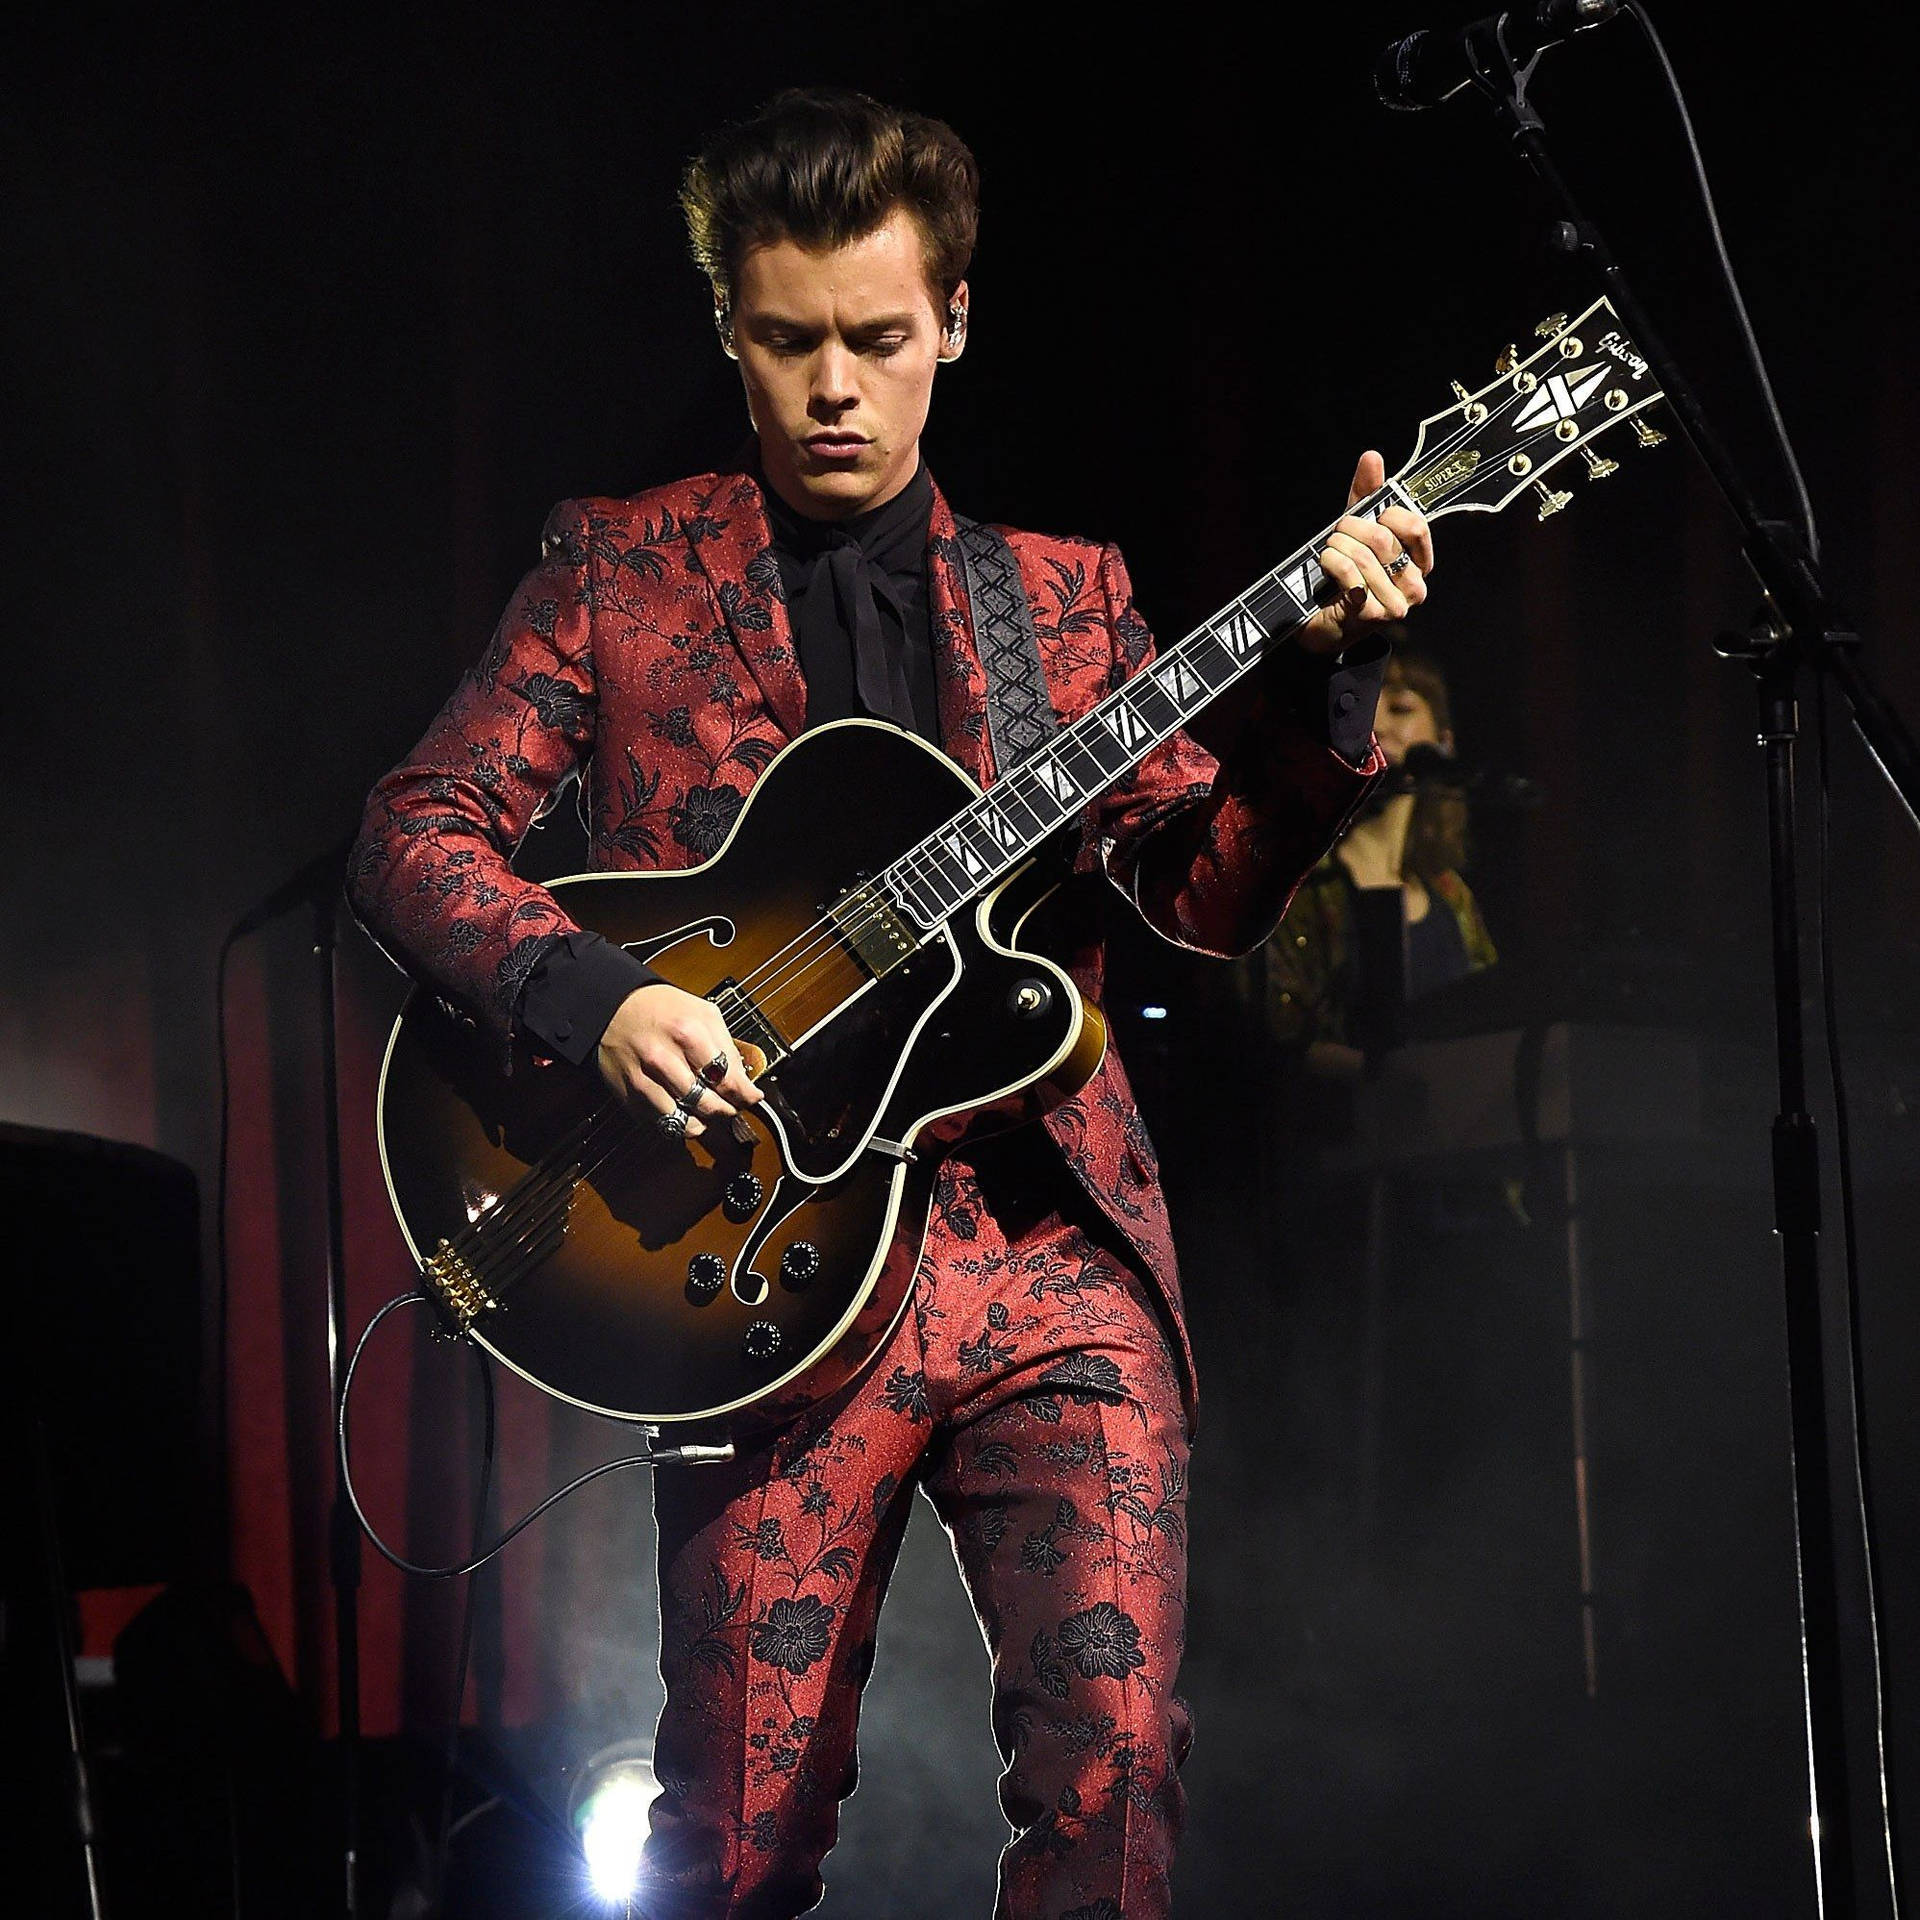 Get the Stunning Image of Harry Styles on Your Phone Wallpaper